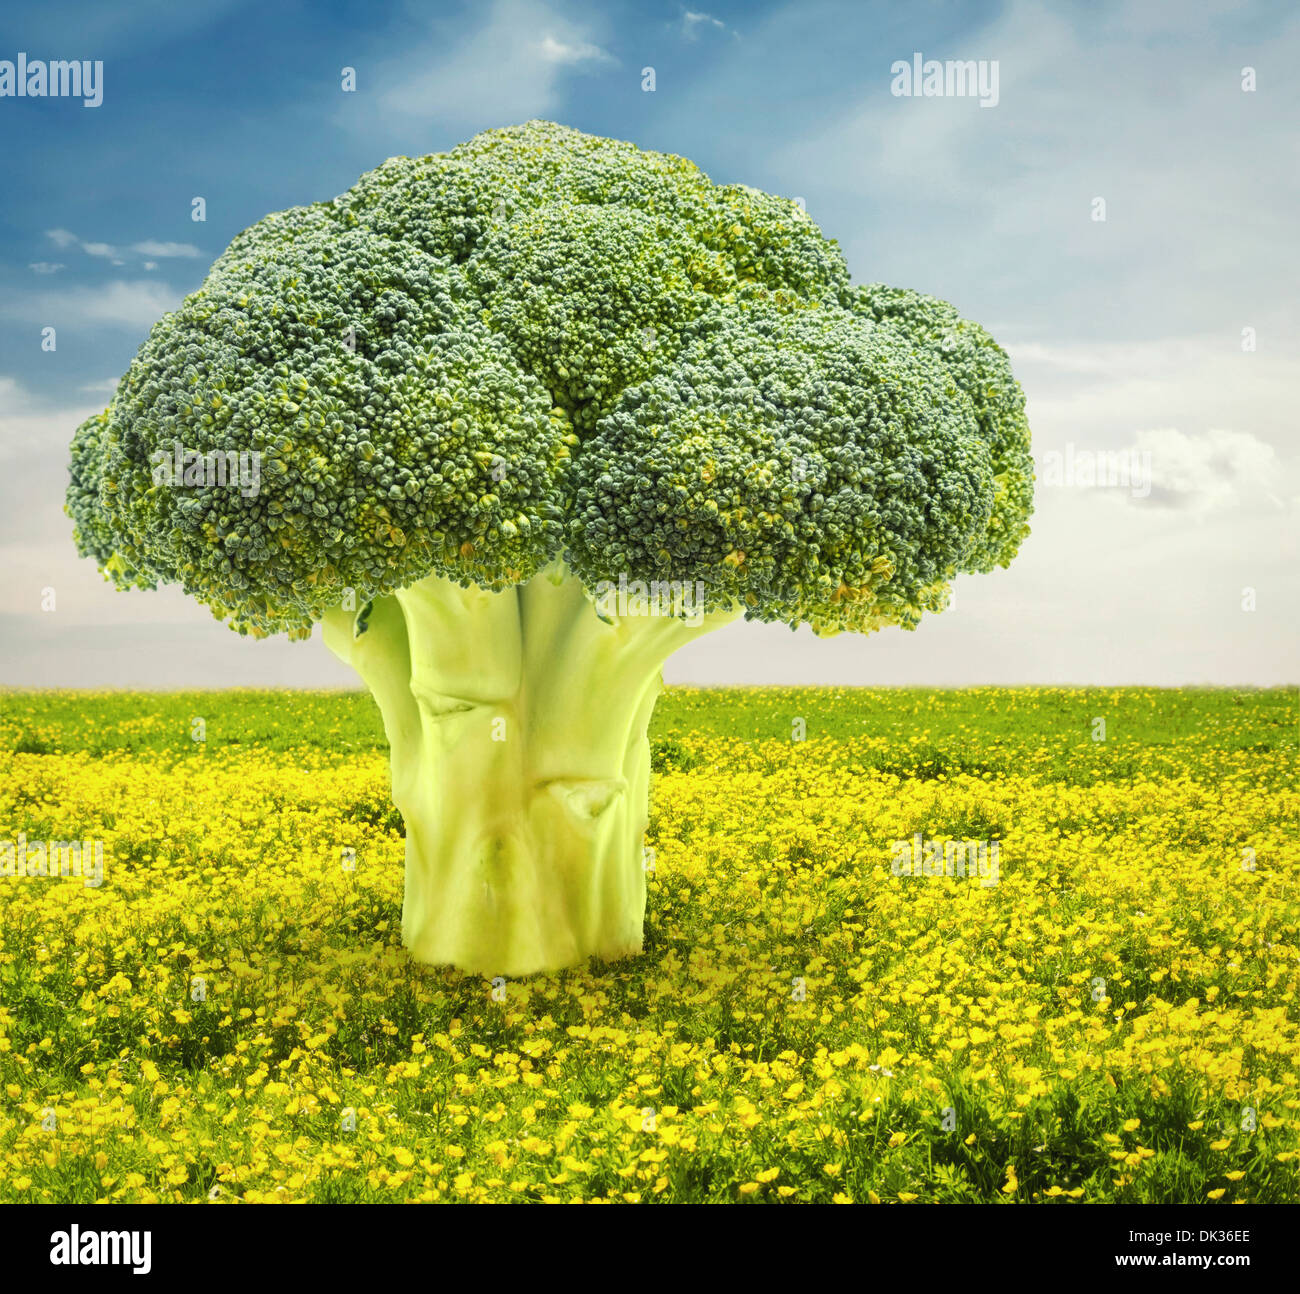 Composite of broccoli tree in flower field Stock Photo